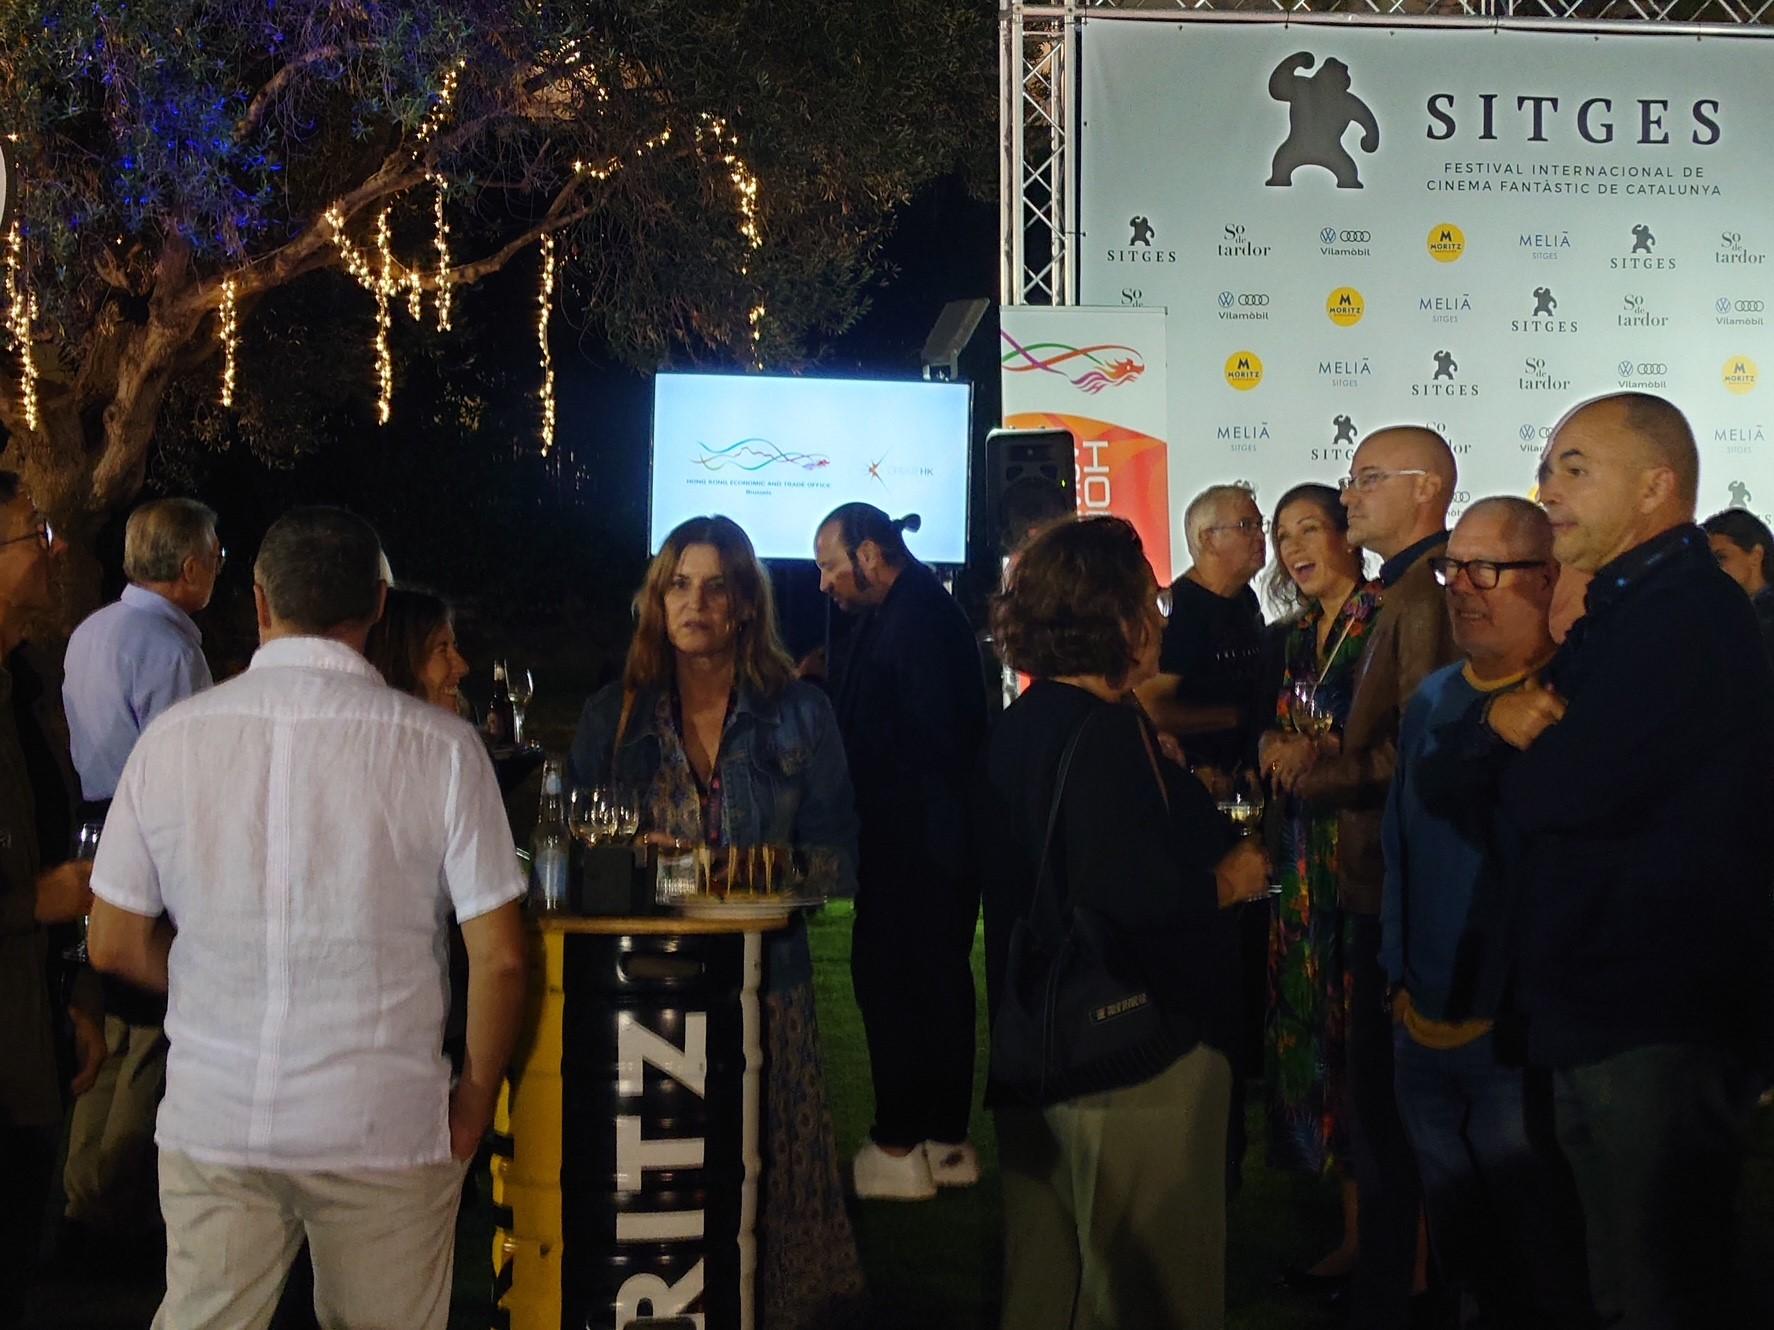 The Hong Kong Economic and Trade Office in Brussels and Create Hong Kong are jointly supporting the 55th Sitges International Fantastic Film Festival of Catalonia, being held in Sitges, Spain from October 6 to 16 (Spain time). Photo shows festival goers at Sitges International Fantastic Film Festival of Catalonia on October 9 (Spain time).